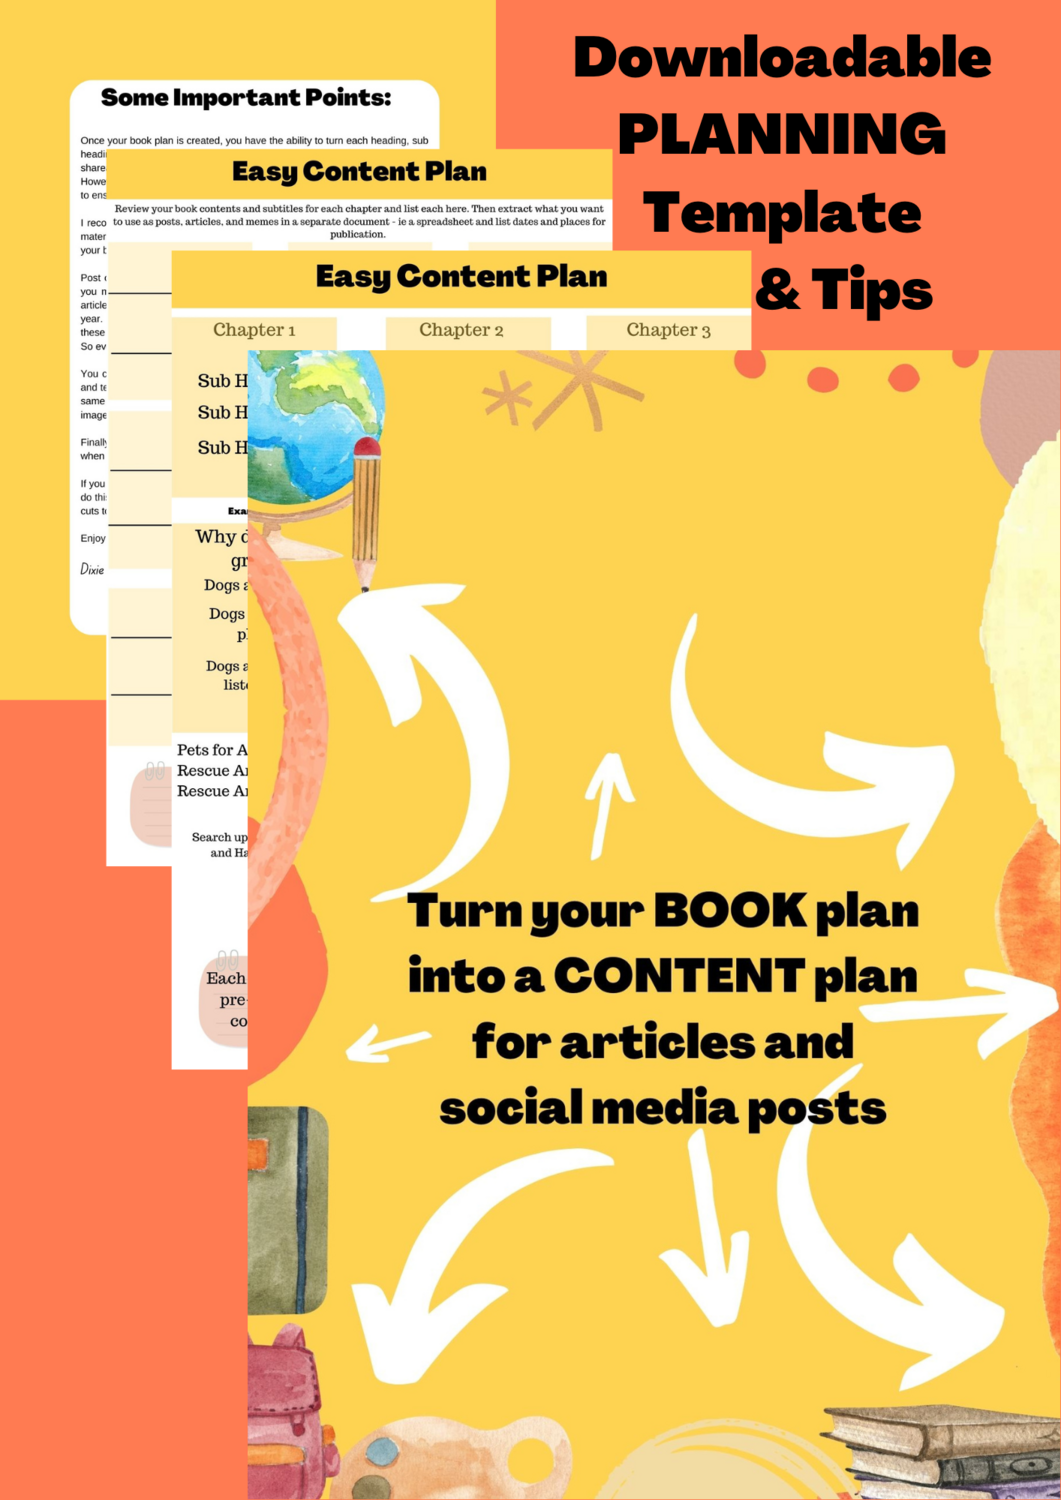 A: Turn your BOOK Plan into an Easy CONTENT Plan for articles and posts.